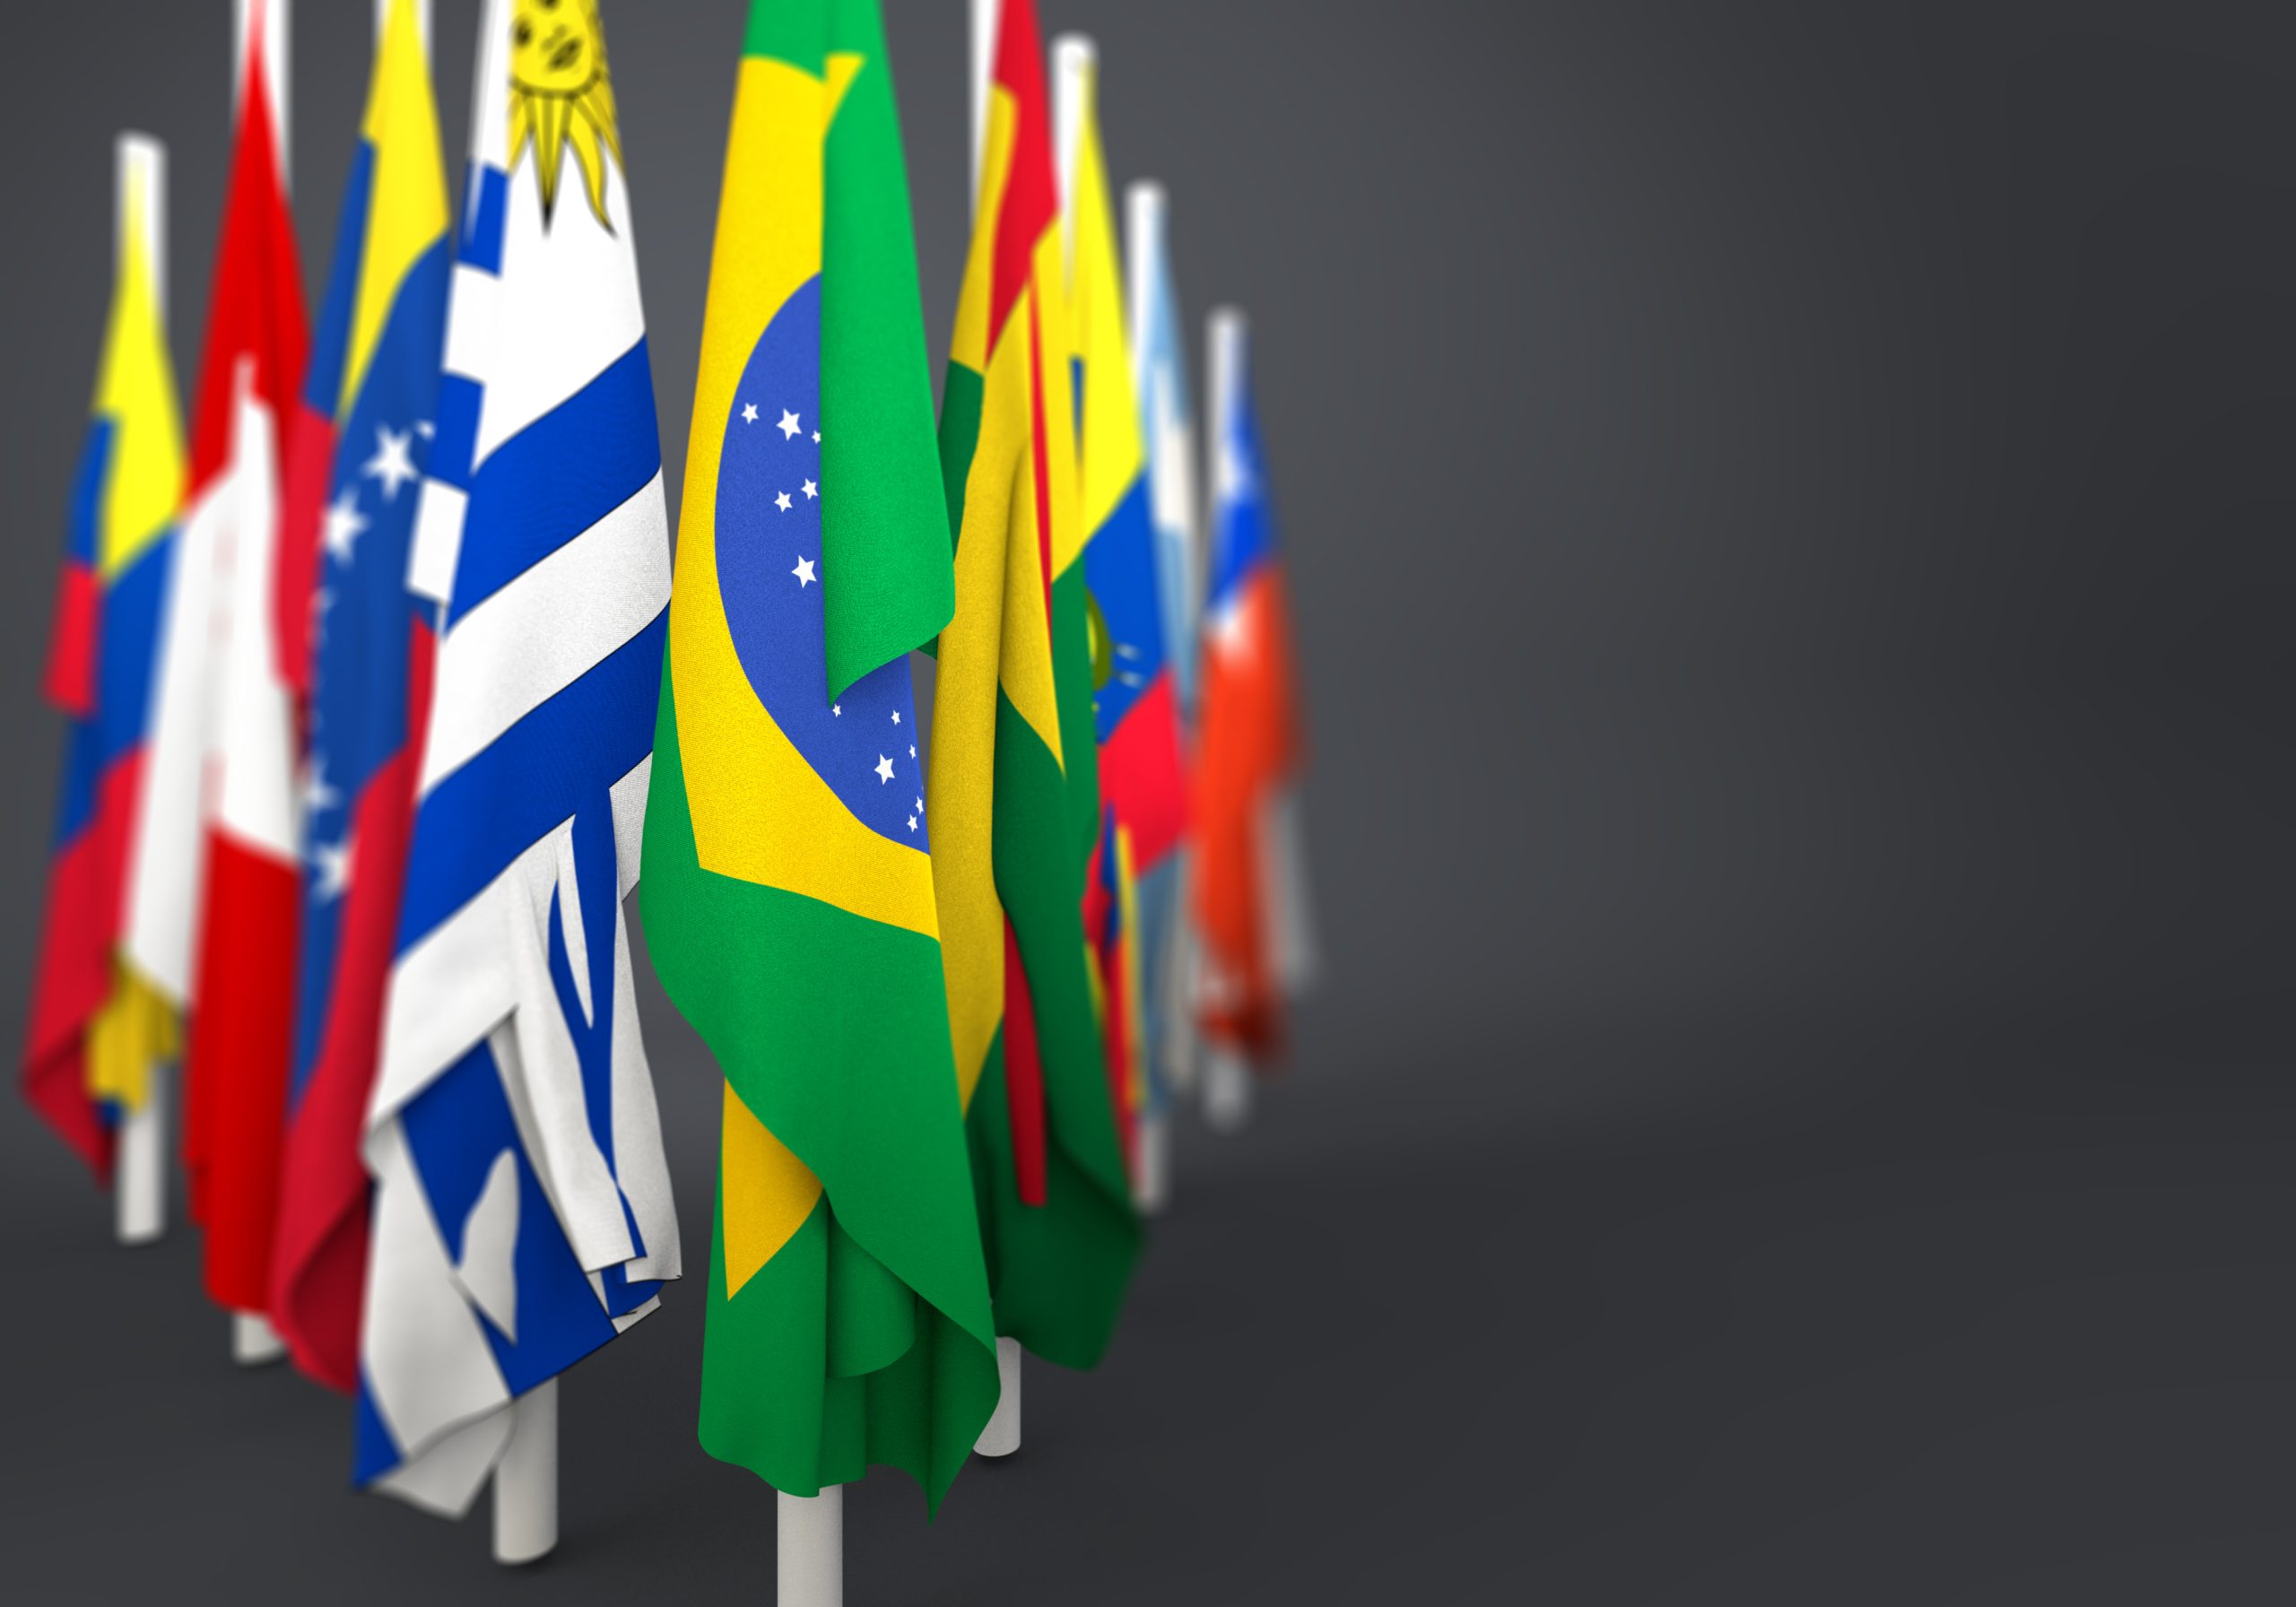 Language Requirements for Medical Devices in Latin America LatAm